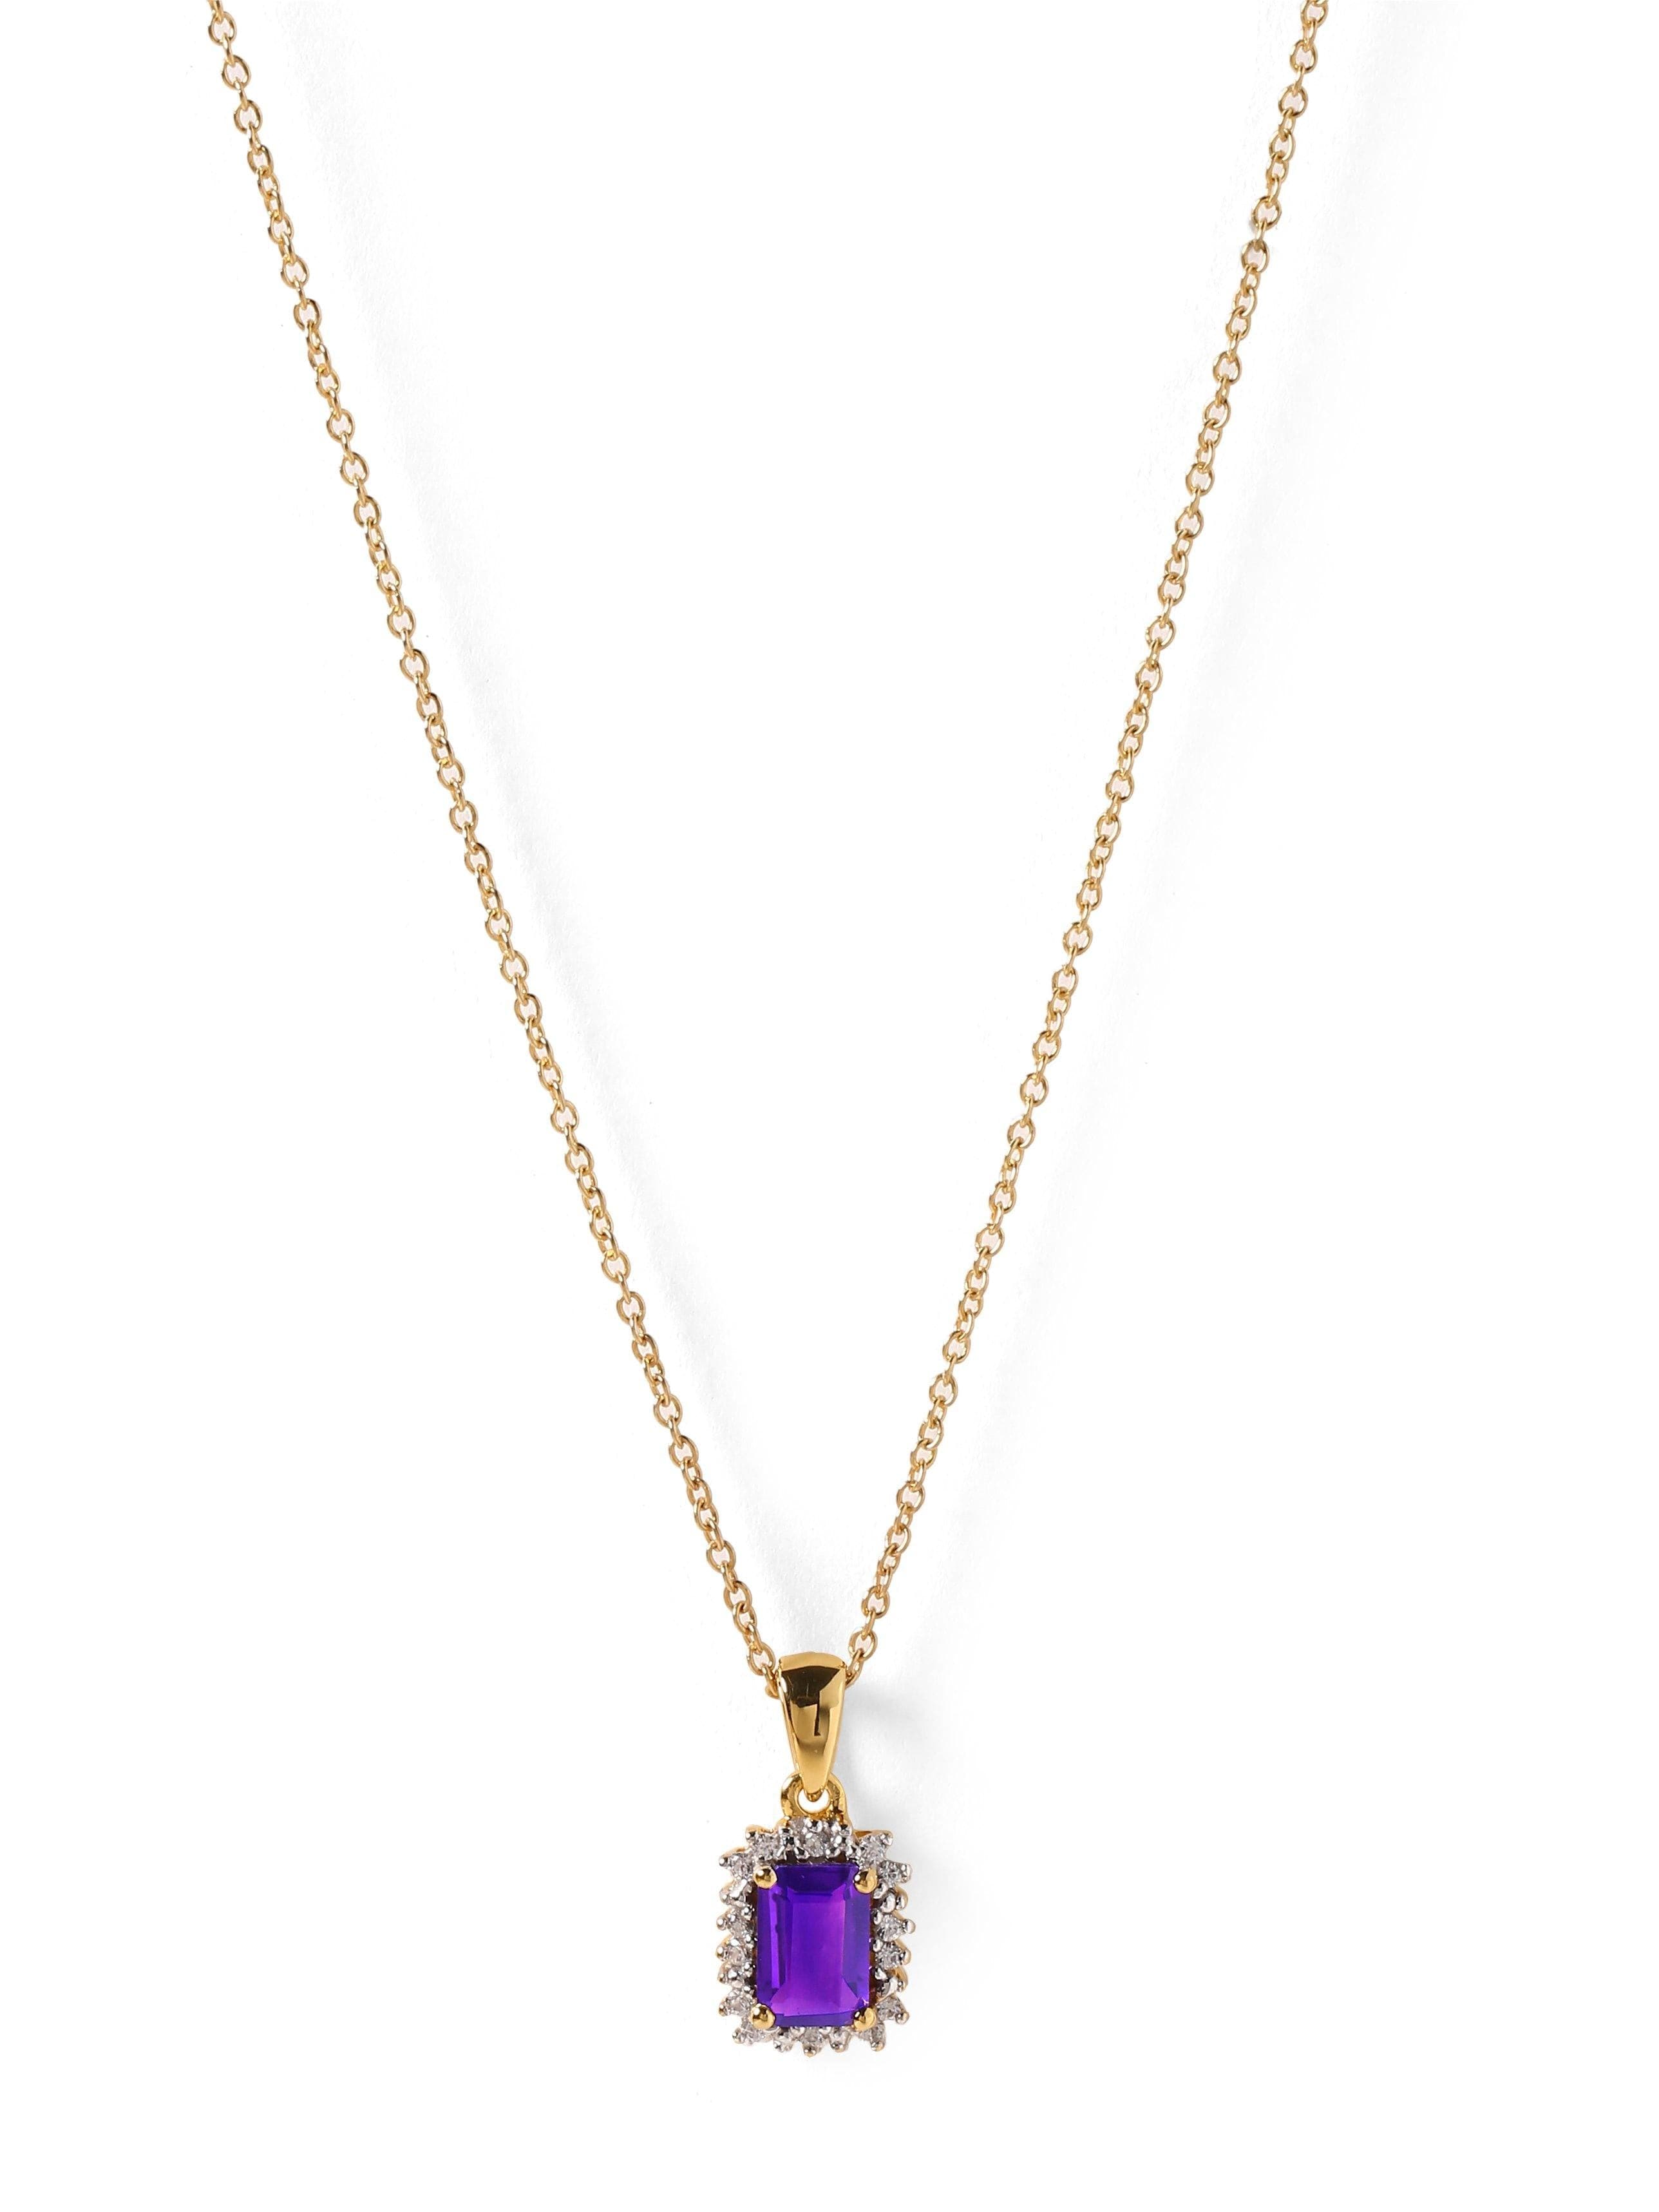 0.67 Ct. Amethyst Solid 10k Yellow Gold Chain Pendant Necklace Jewelry - YoTreasure